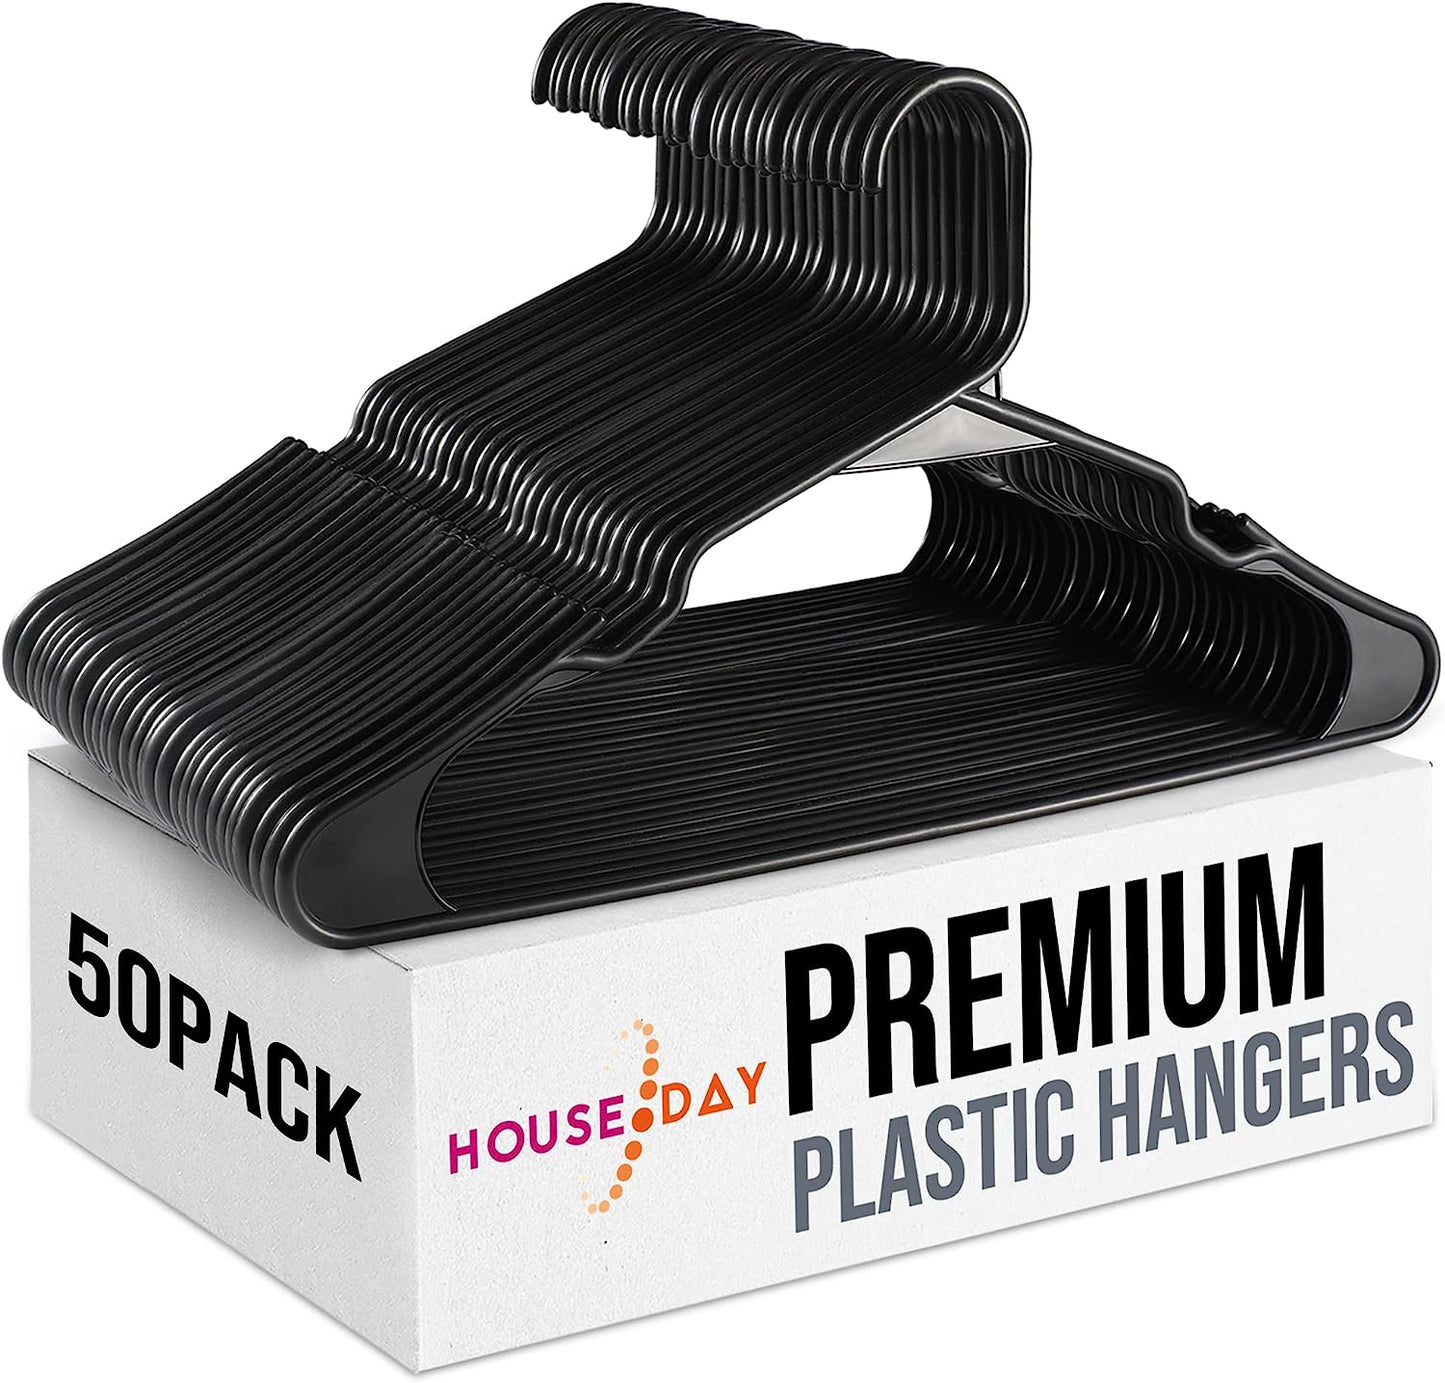 HOUSE DAY 16.5x9.3 Inch Plastic Hangers 50 Pack